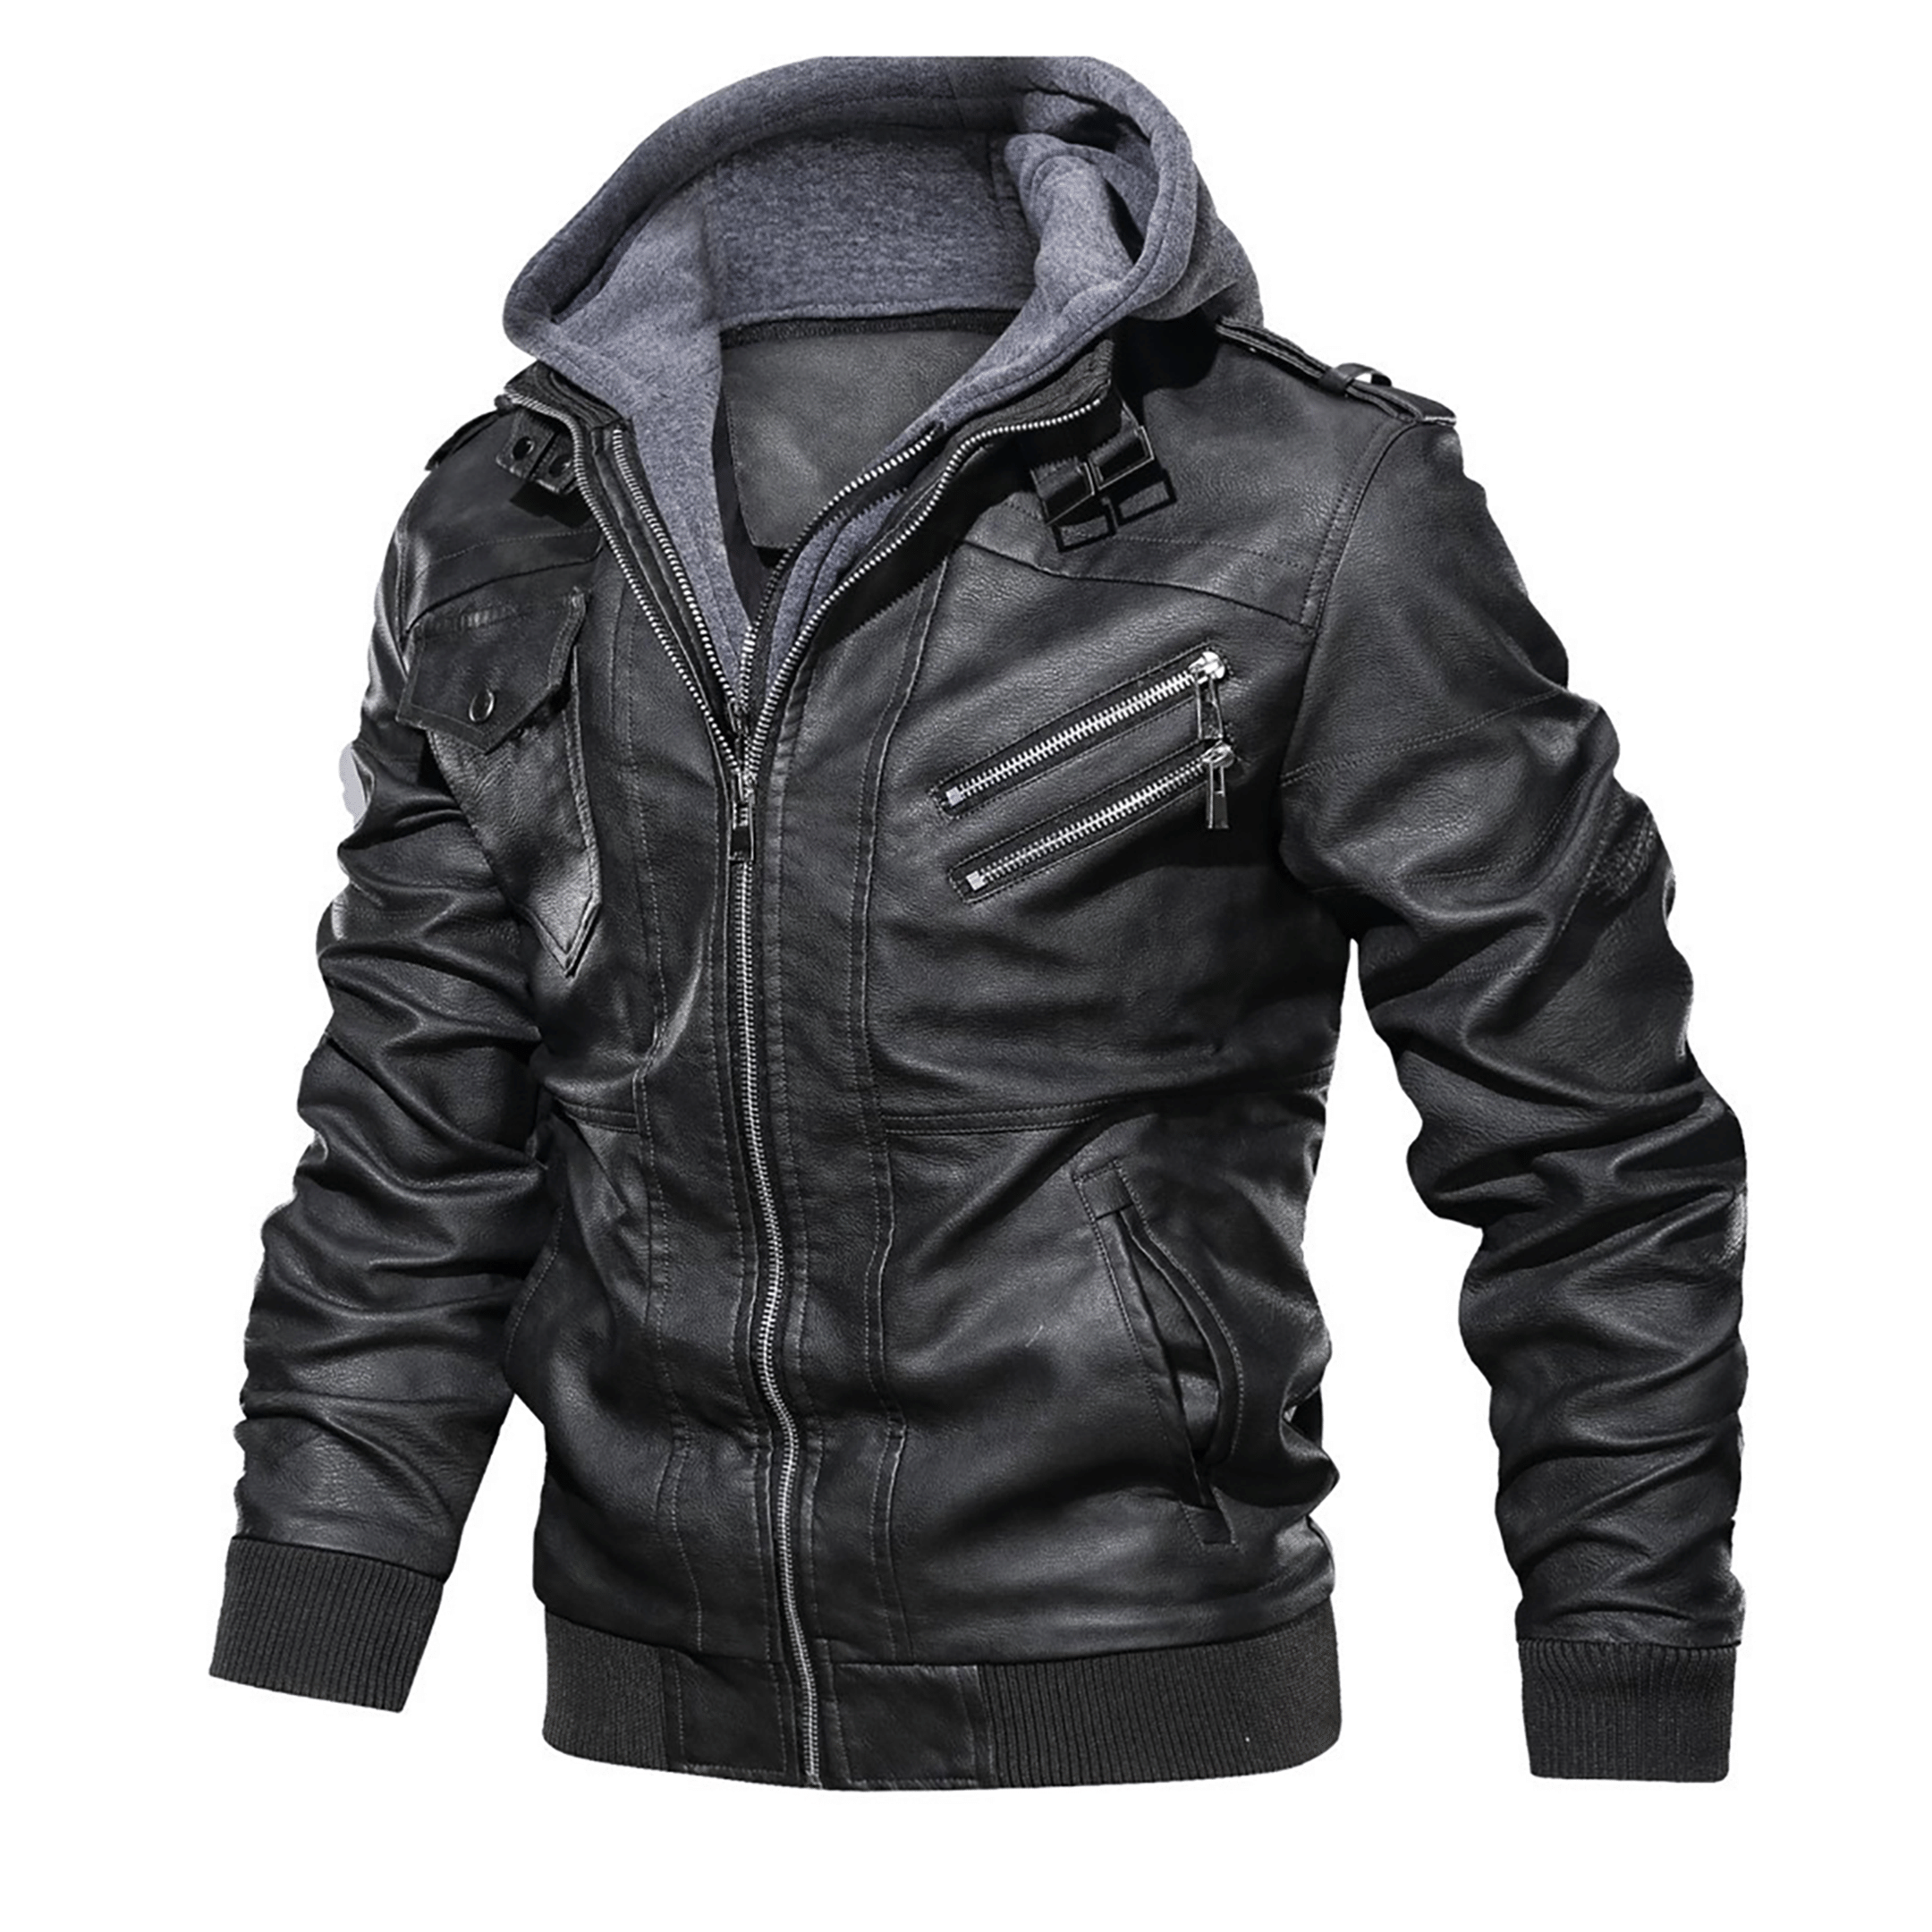 Top leather jackets and latest products 453